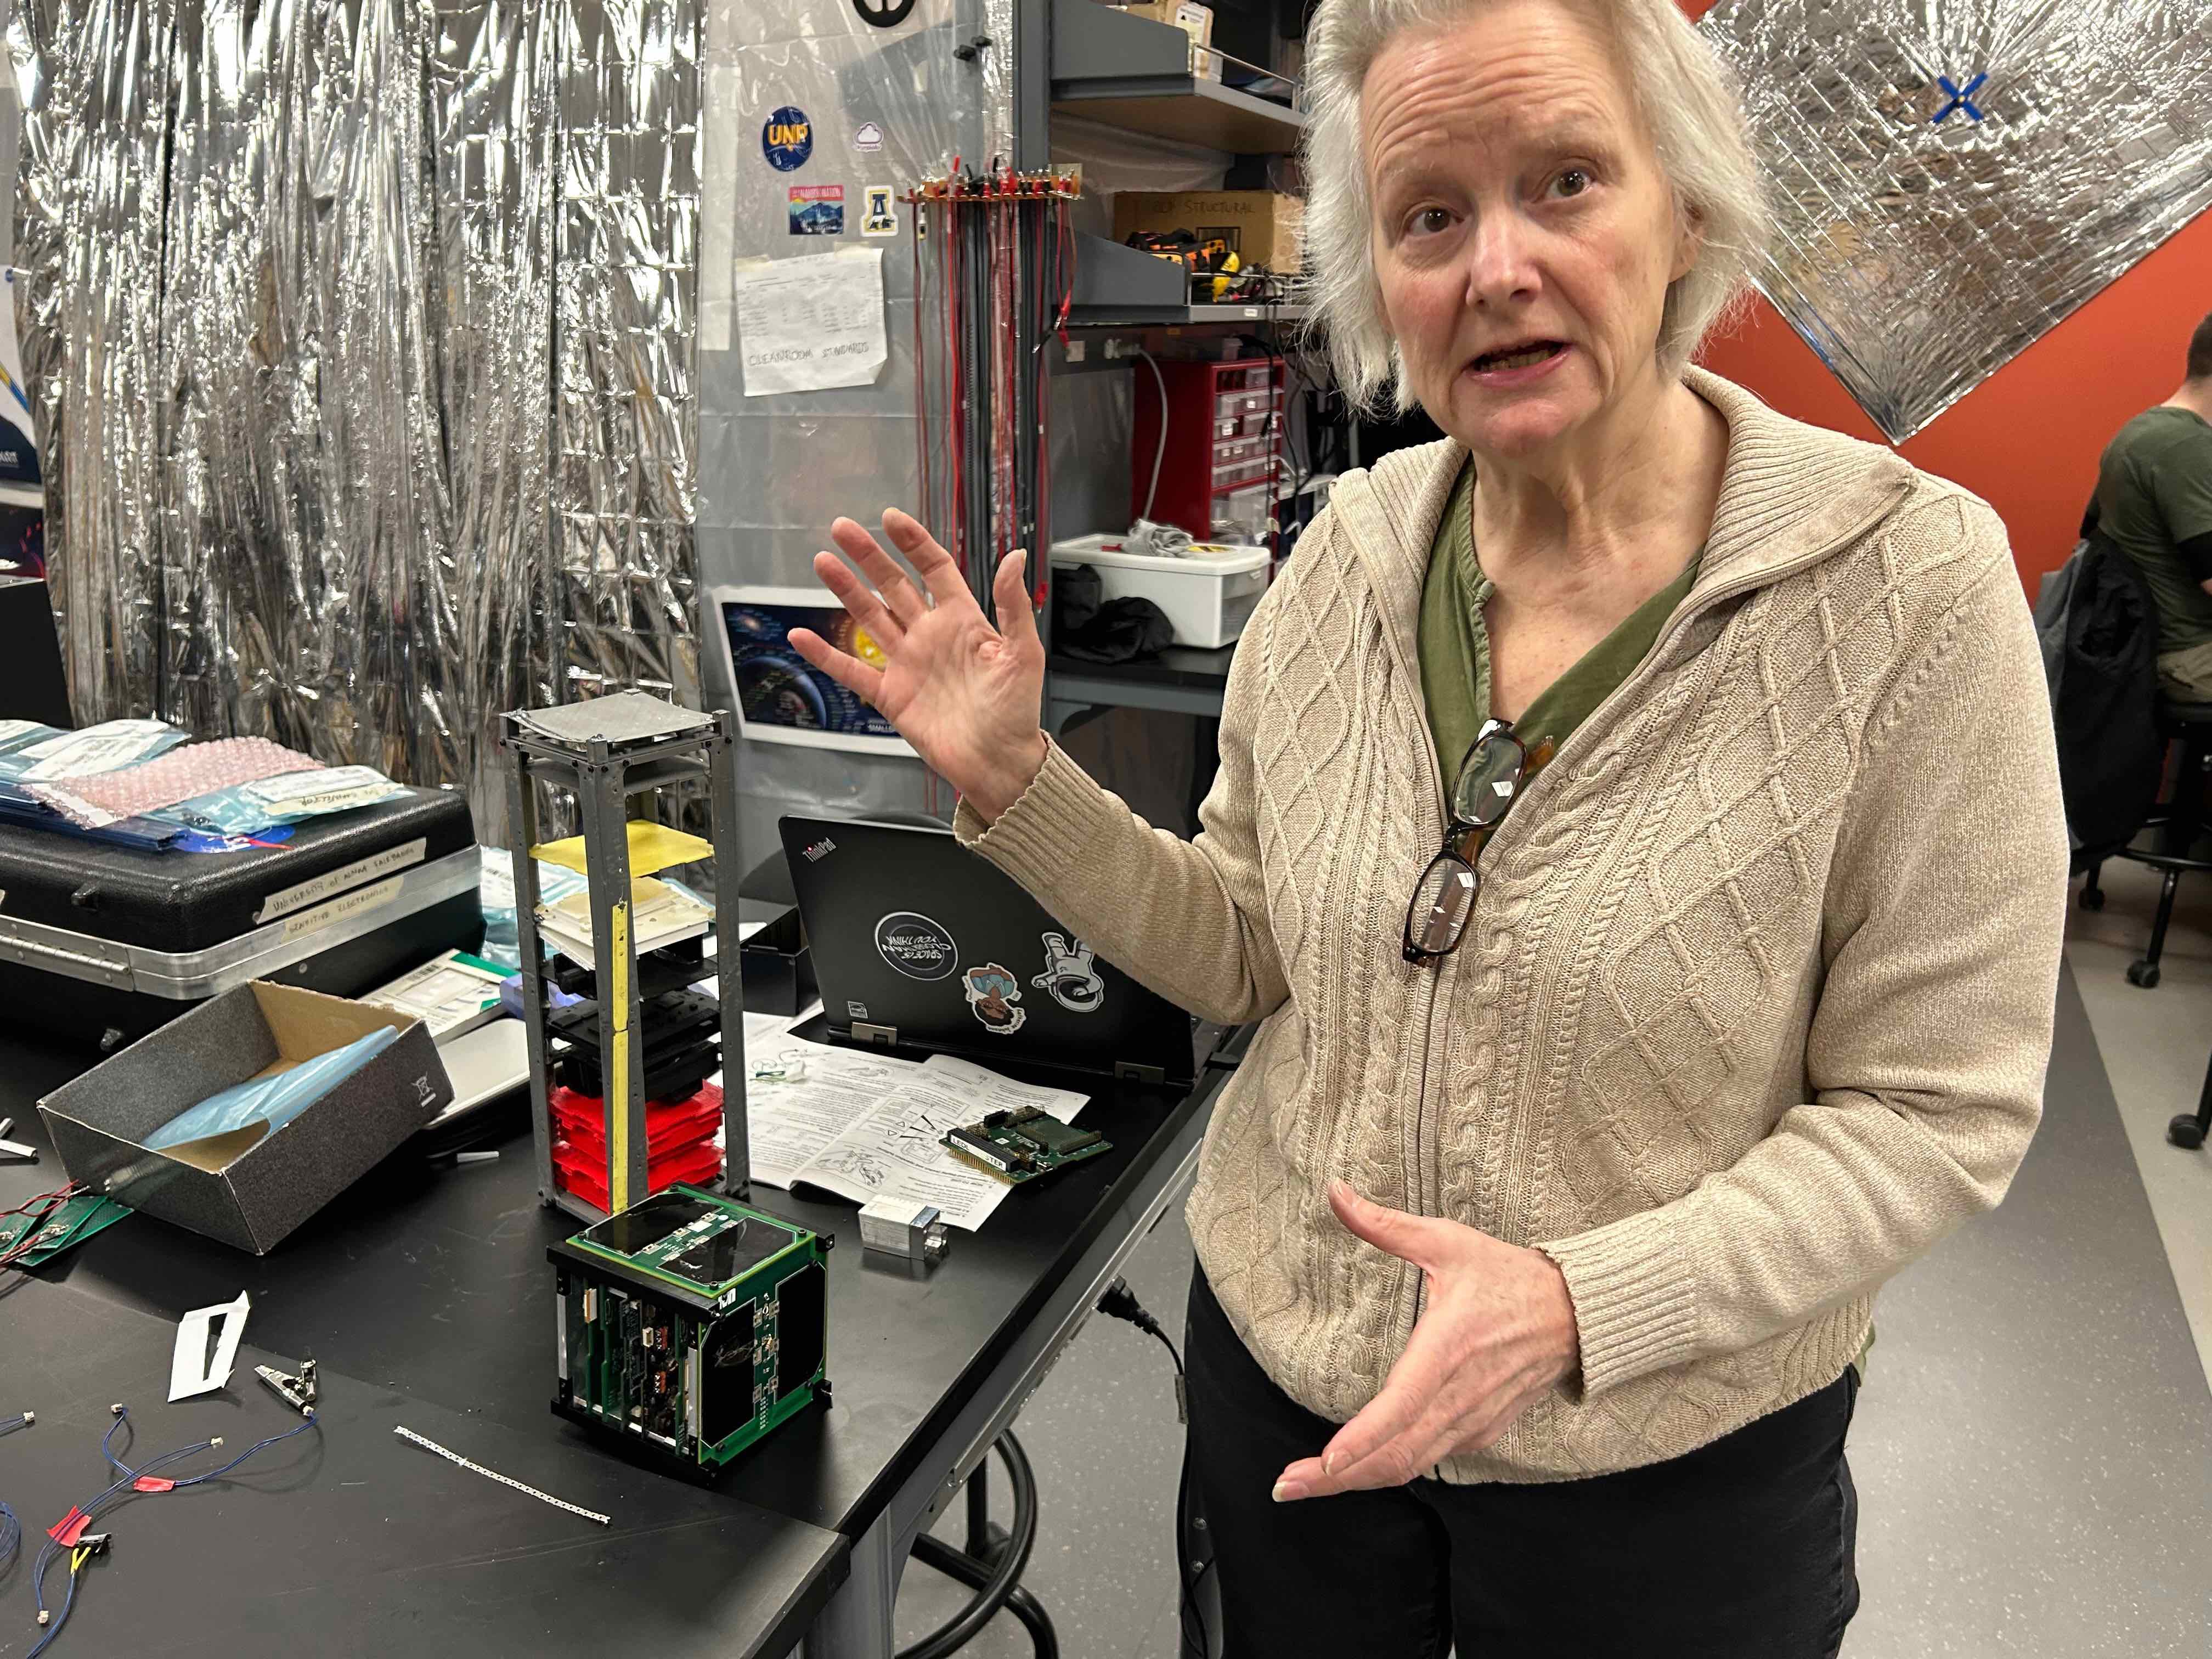 Denise Thorsen explains some of the work underway by students in the University of Alaska Fairbanks Space Systems Engineering Program earlier this year. Photo by Rod Boyce